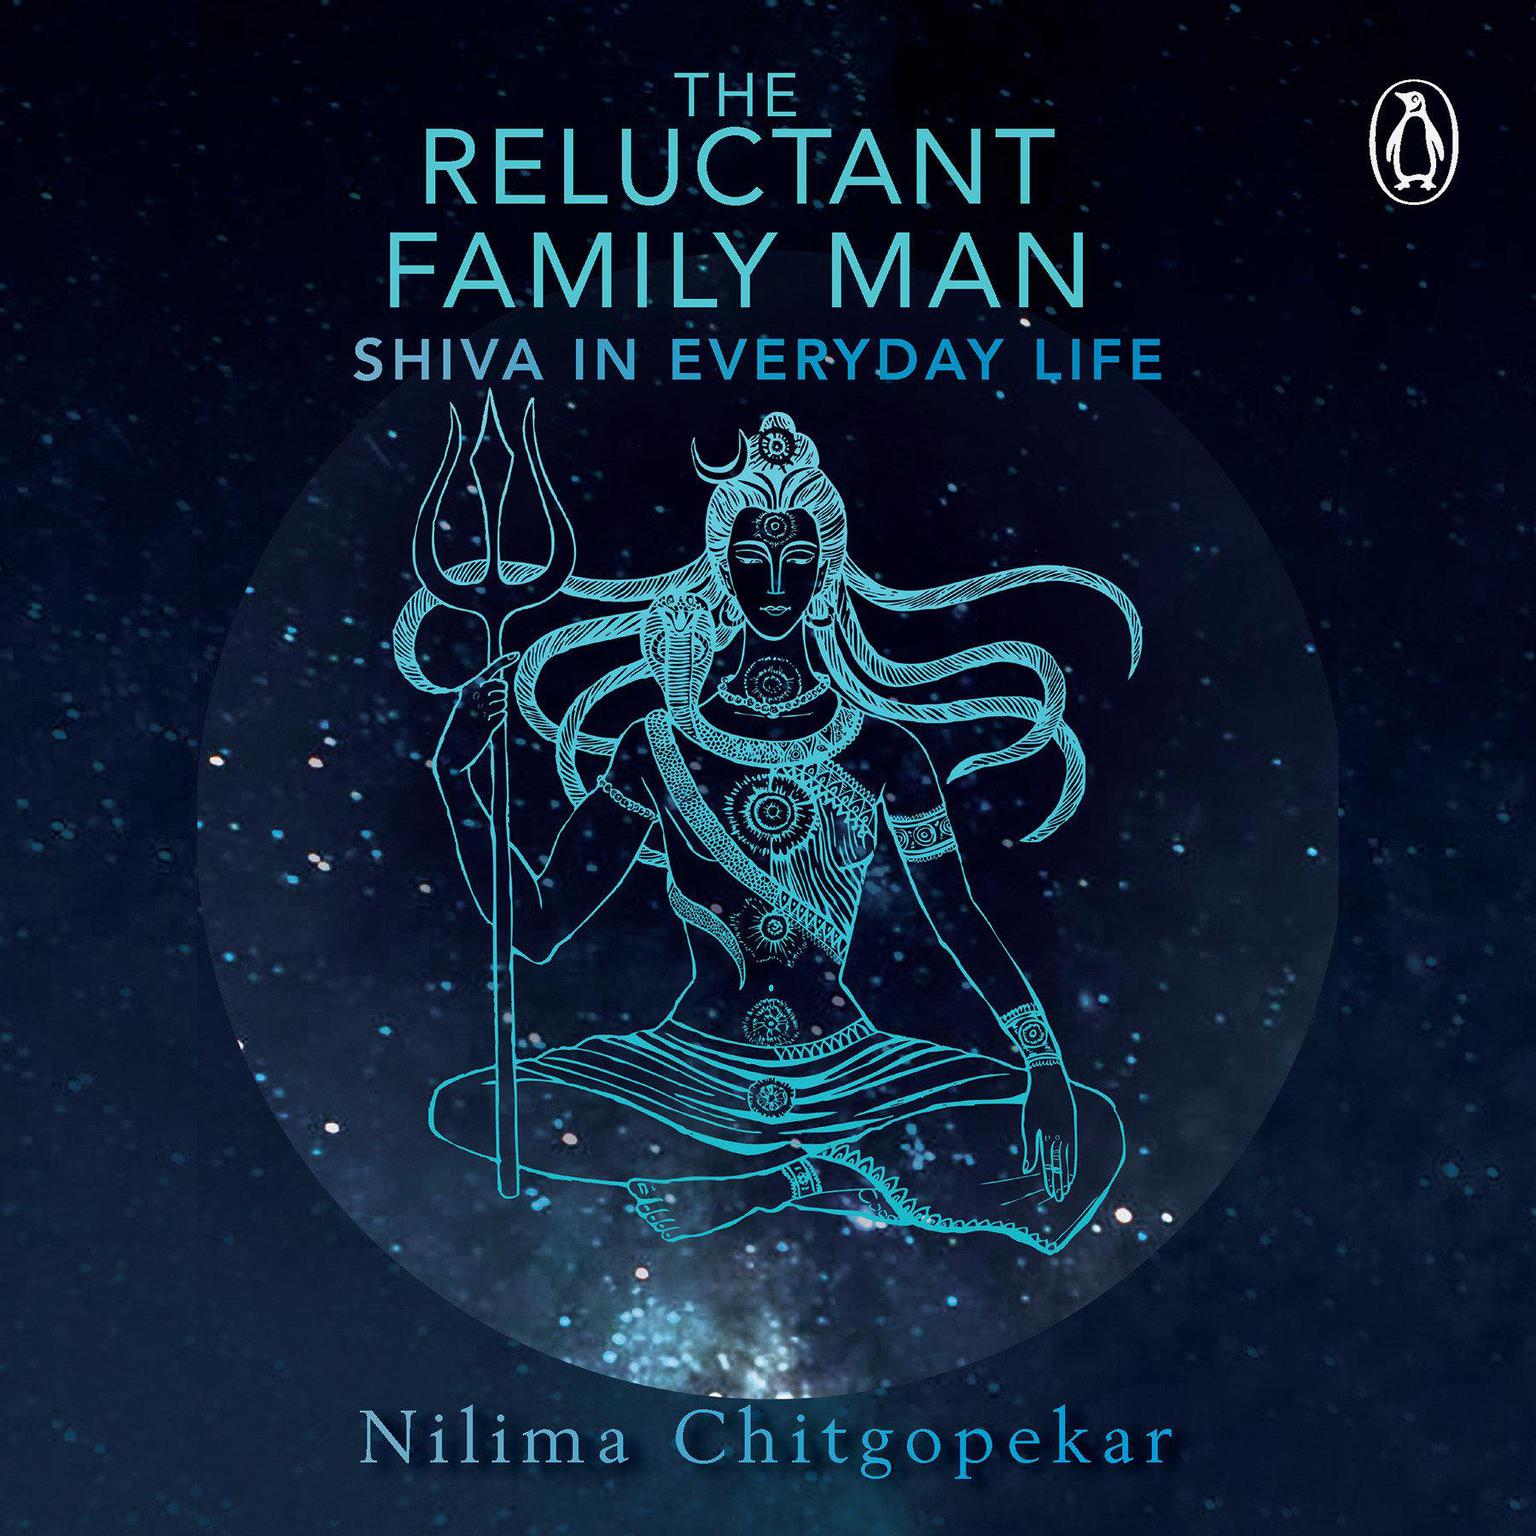 The Reluctant Family Man: Shiva in Everyday Life Audiobook, by Nilima Chitgopekar